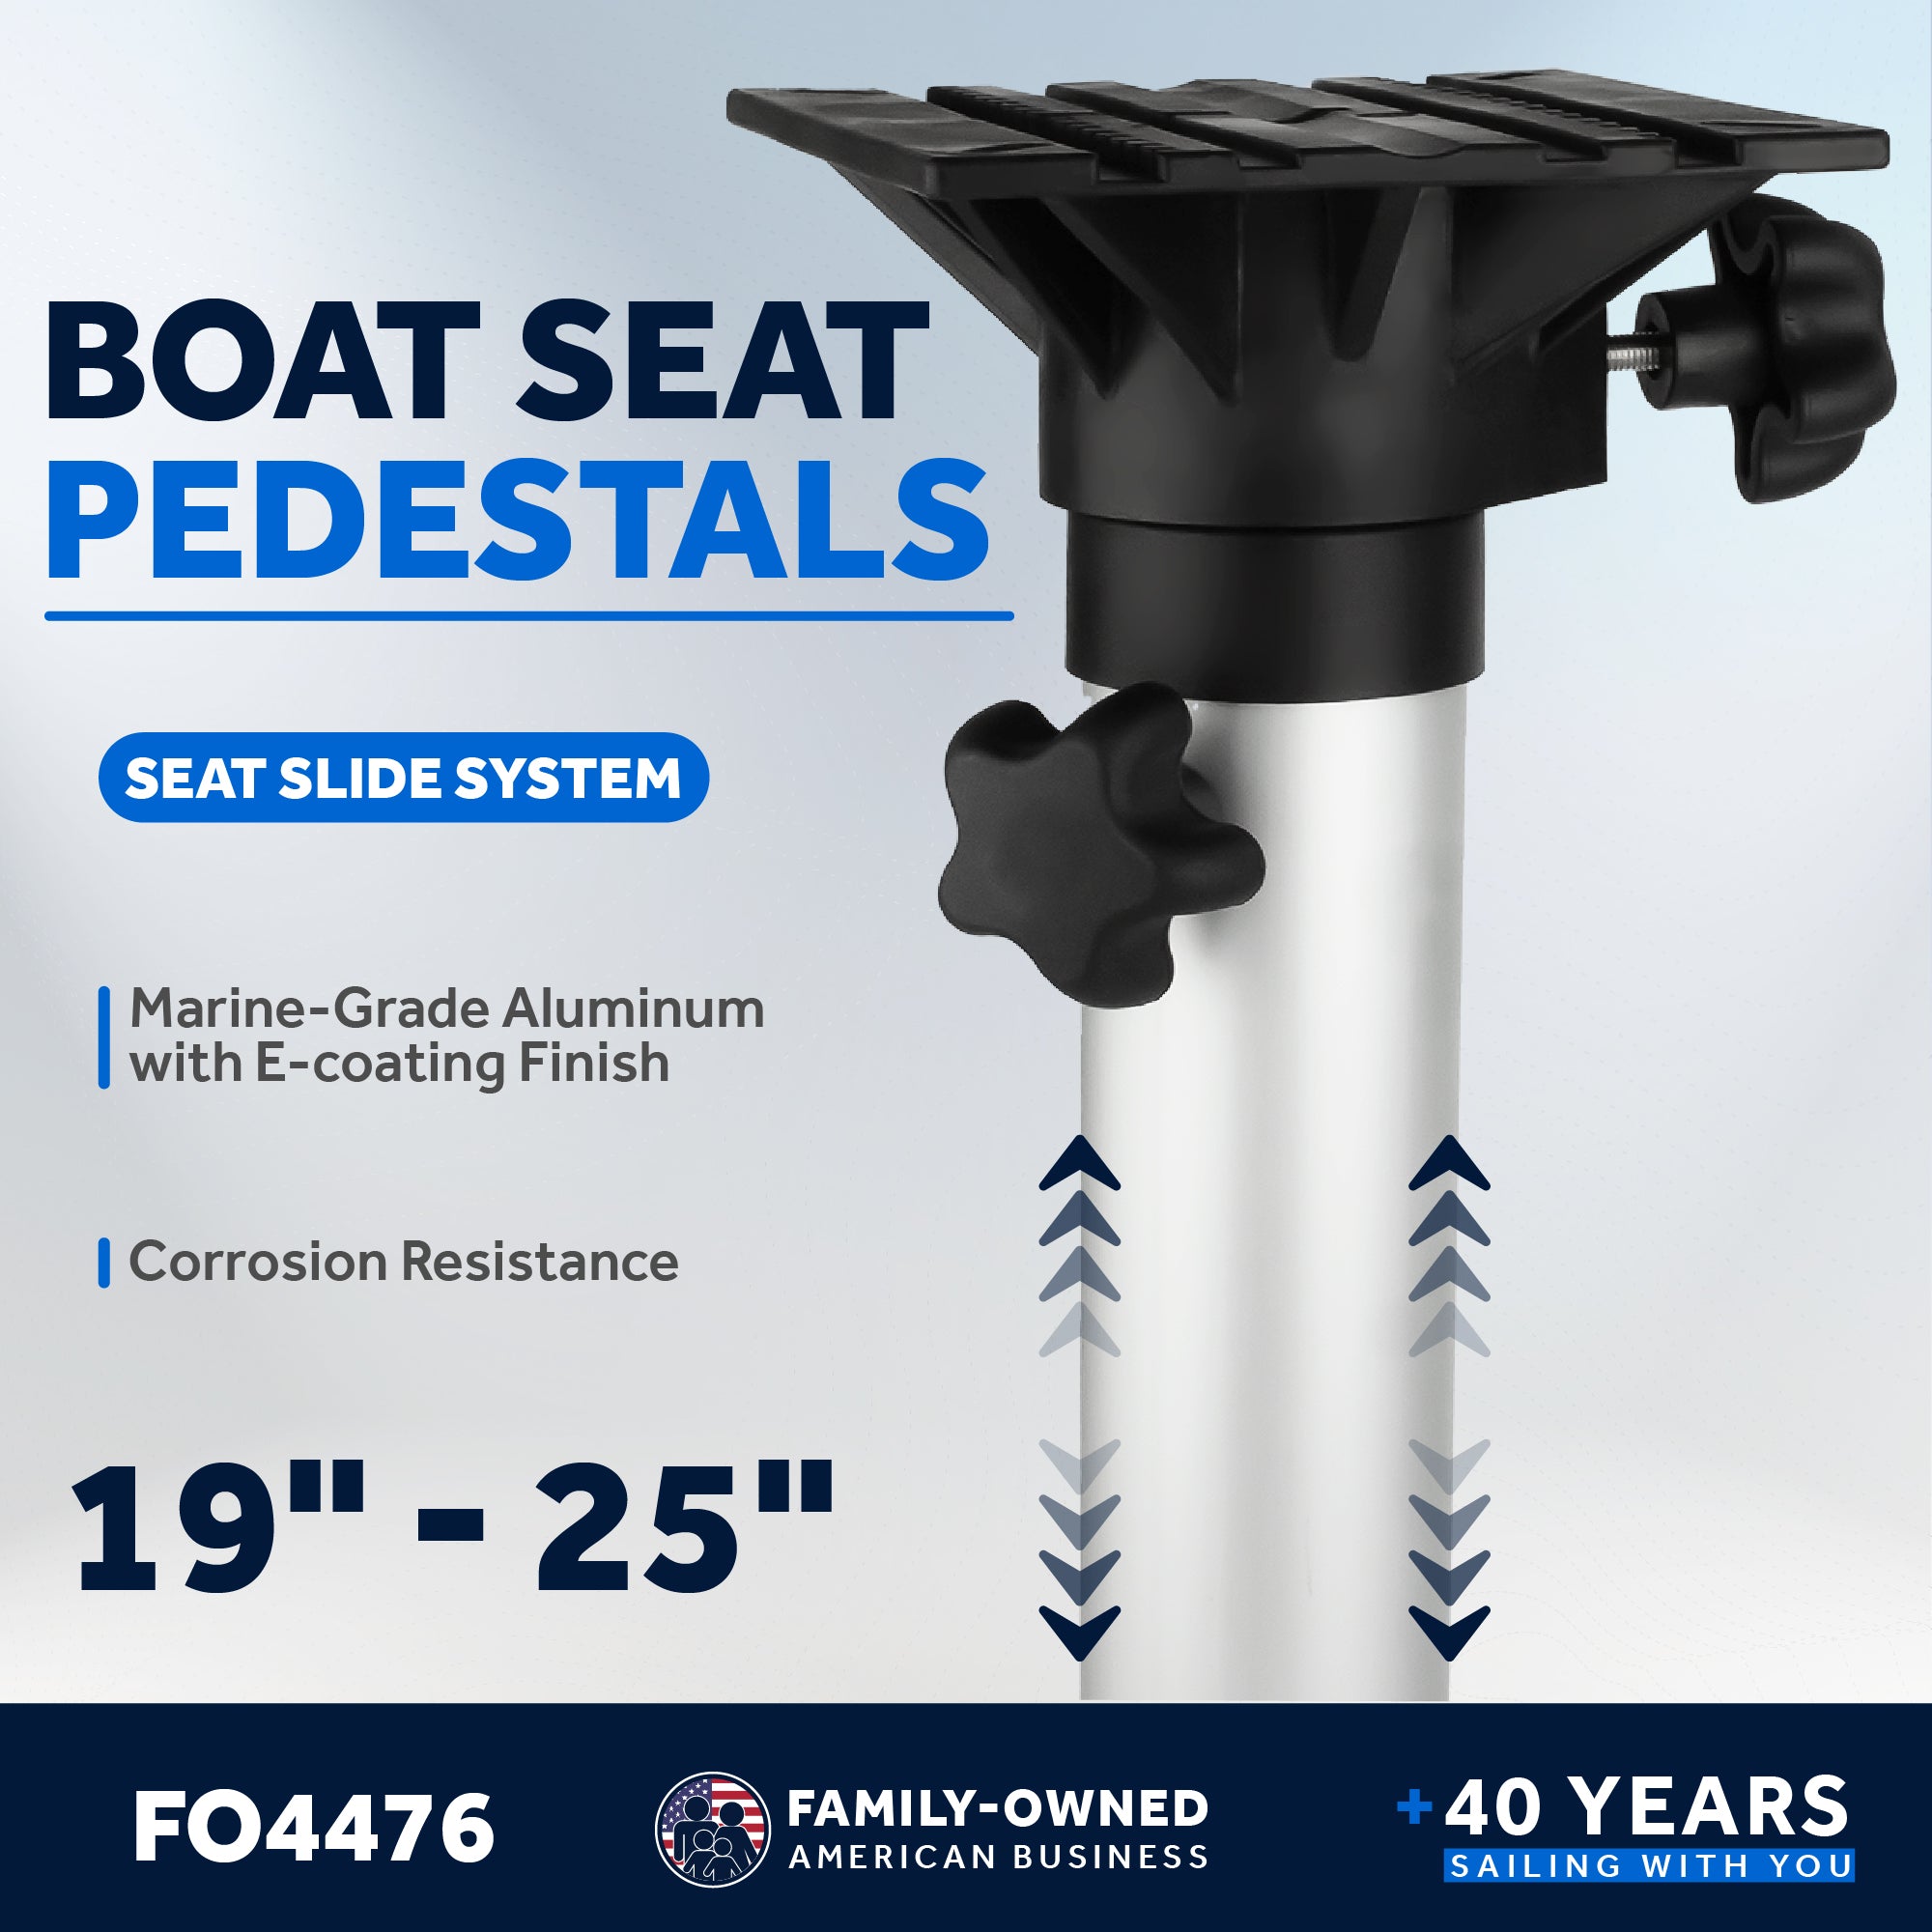 Boat Seat Pedestals, Adjustable from 19" to 25" - FO4476